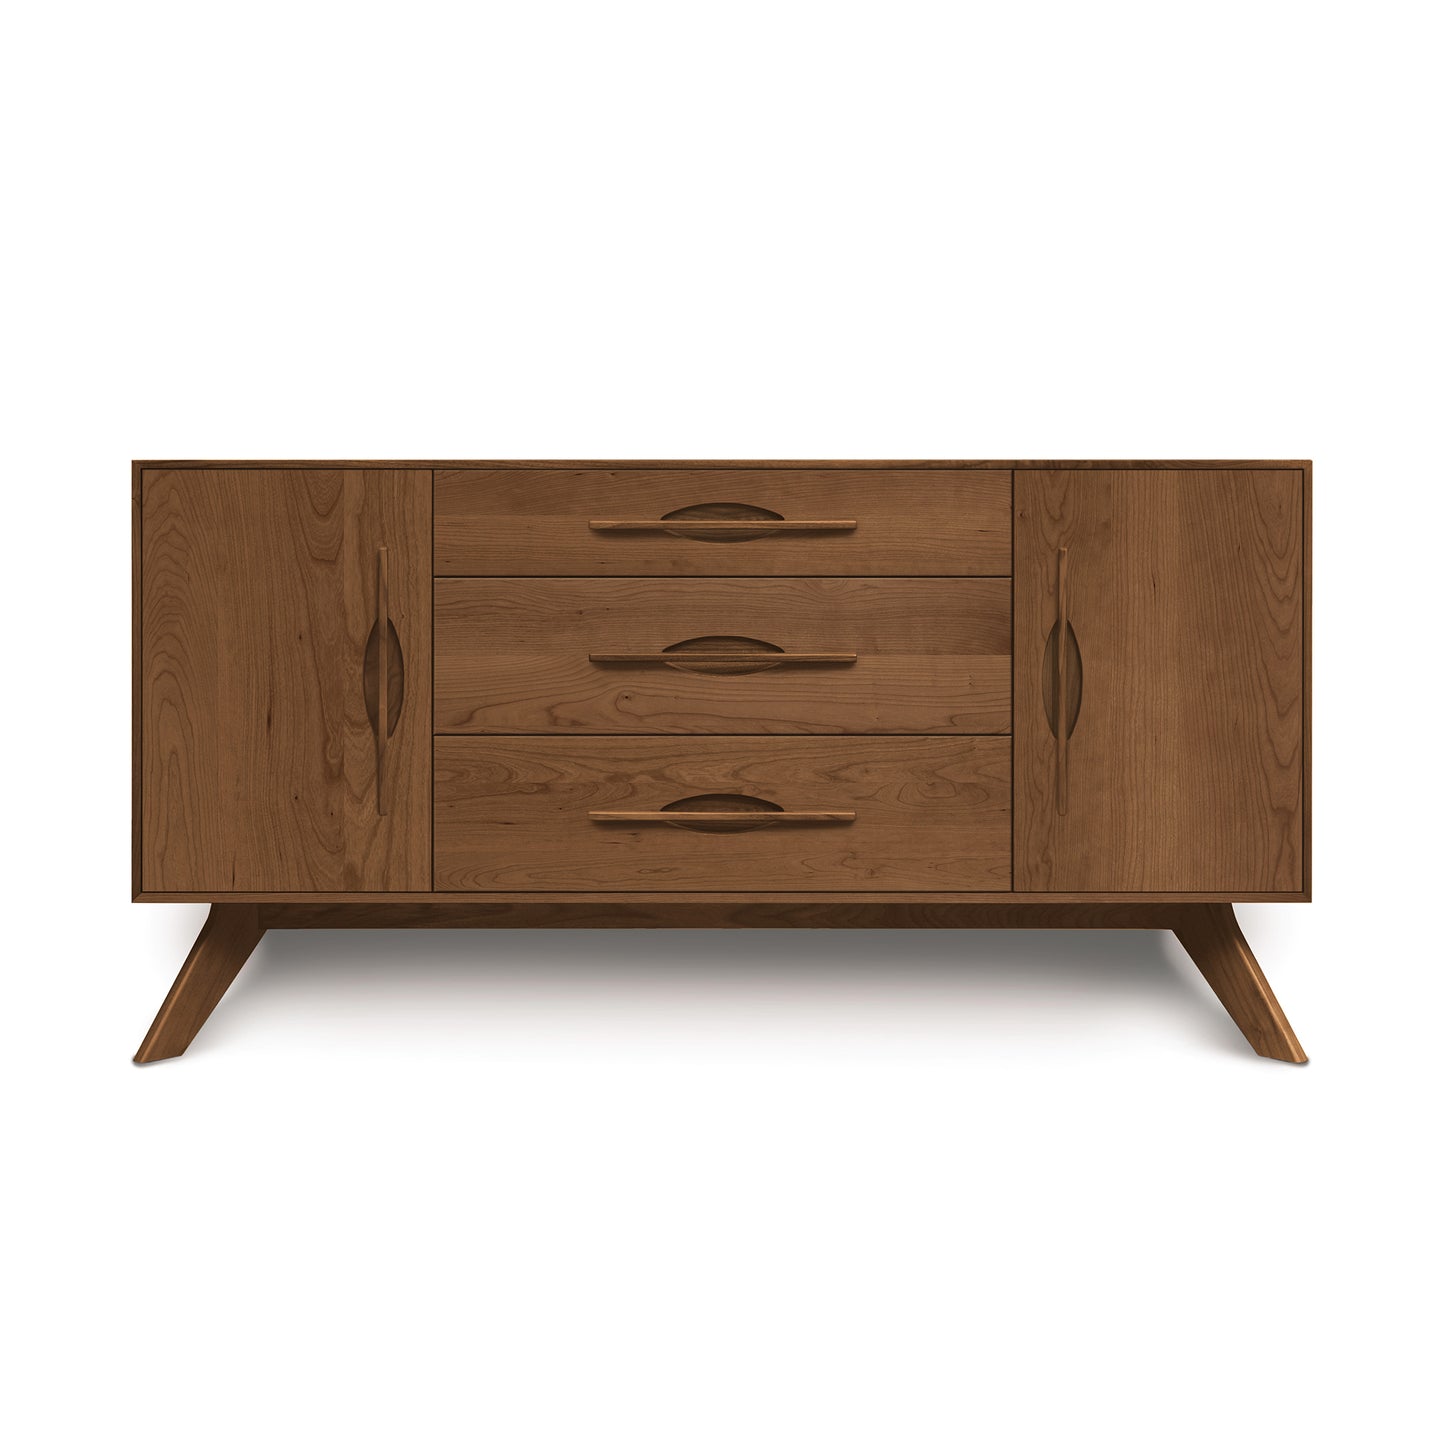 A modern, handmade Audrey 2-Door 3-Drawer Buffet with angled legs and recessed handles on the drawers and doors by Copeland Furniture.